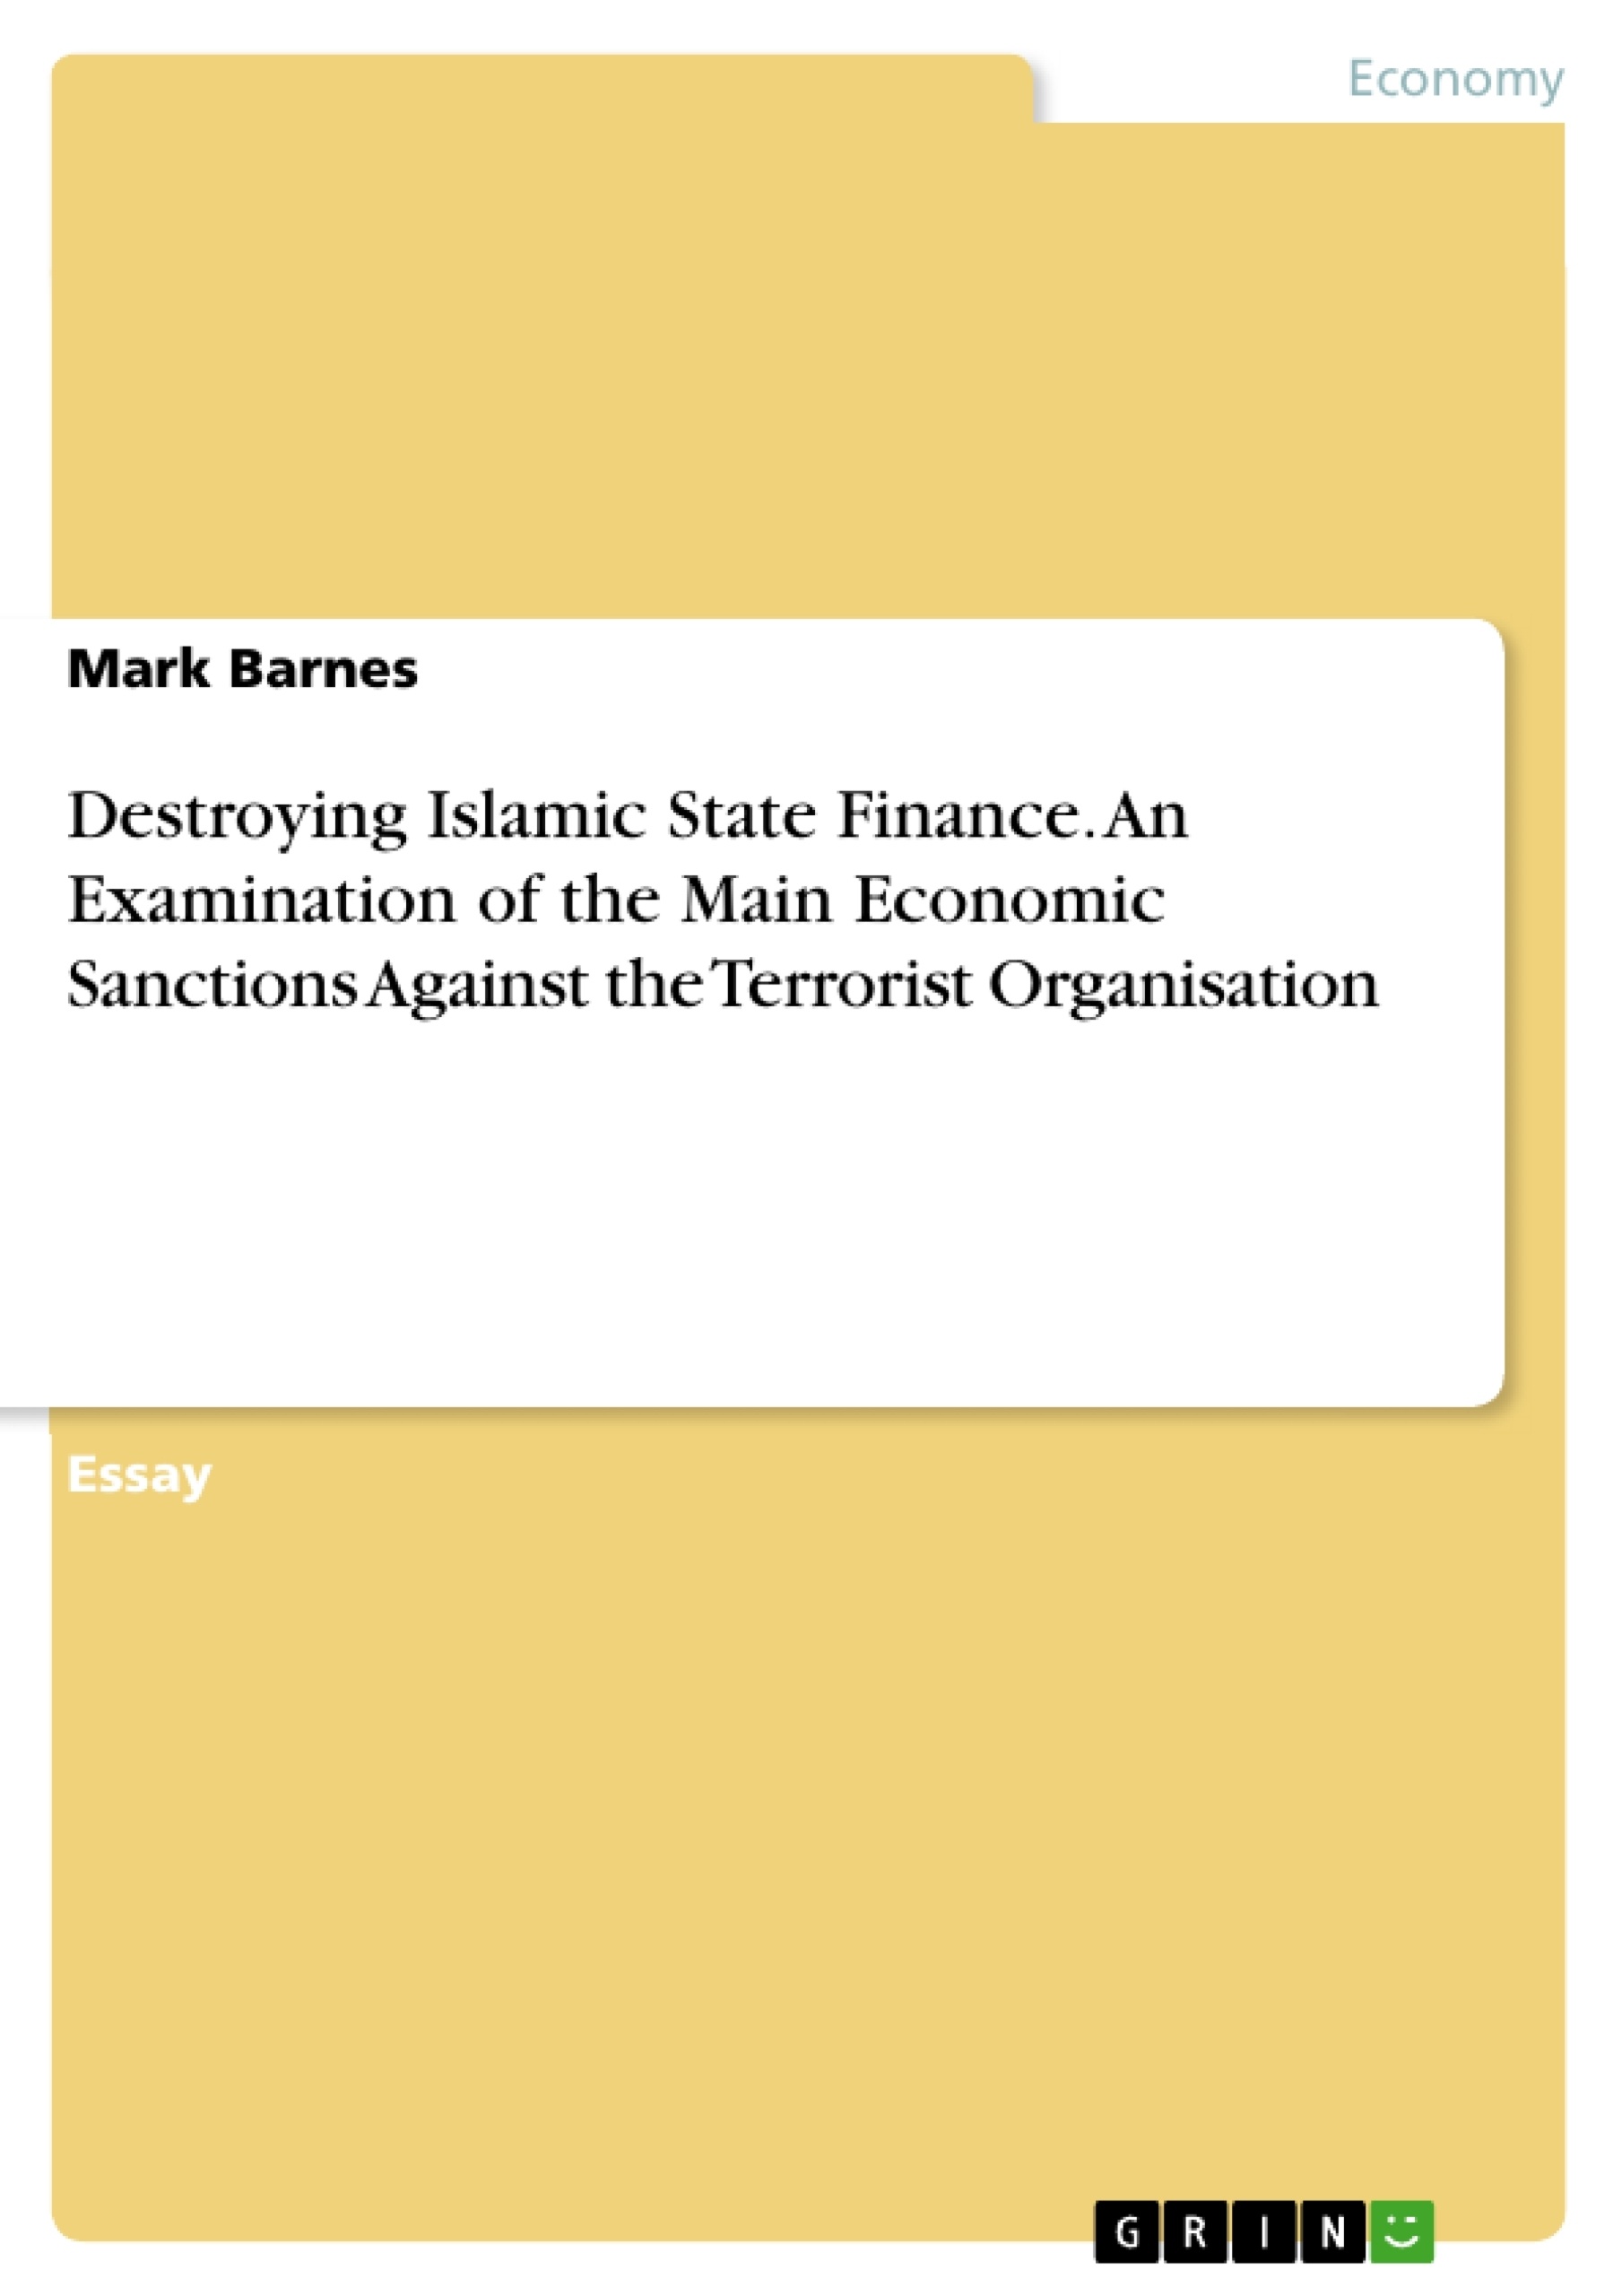 Título: Destroying Islamic State Finance. An Examination of the Main Economic Sanctions Against the Terrorist Organisation